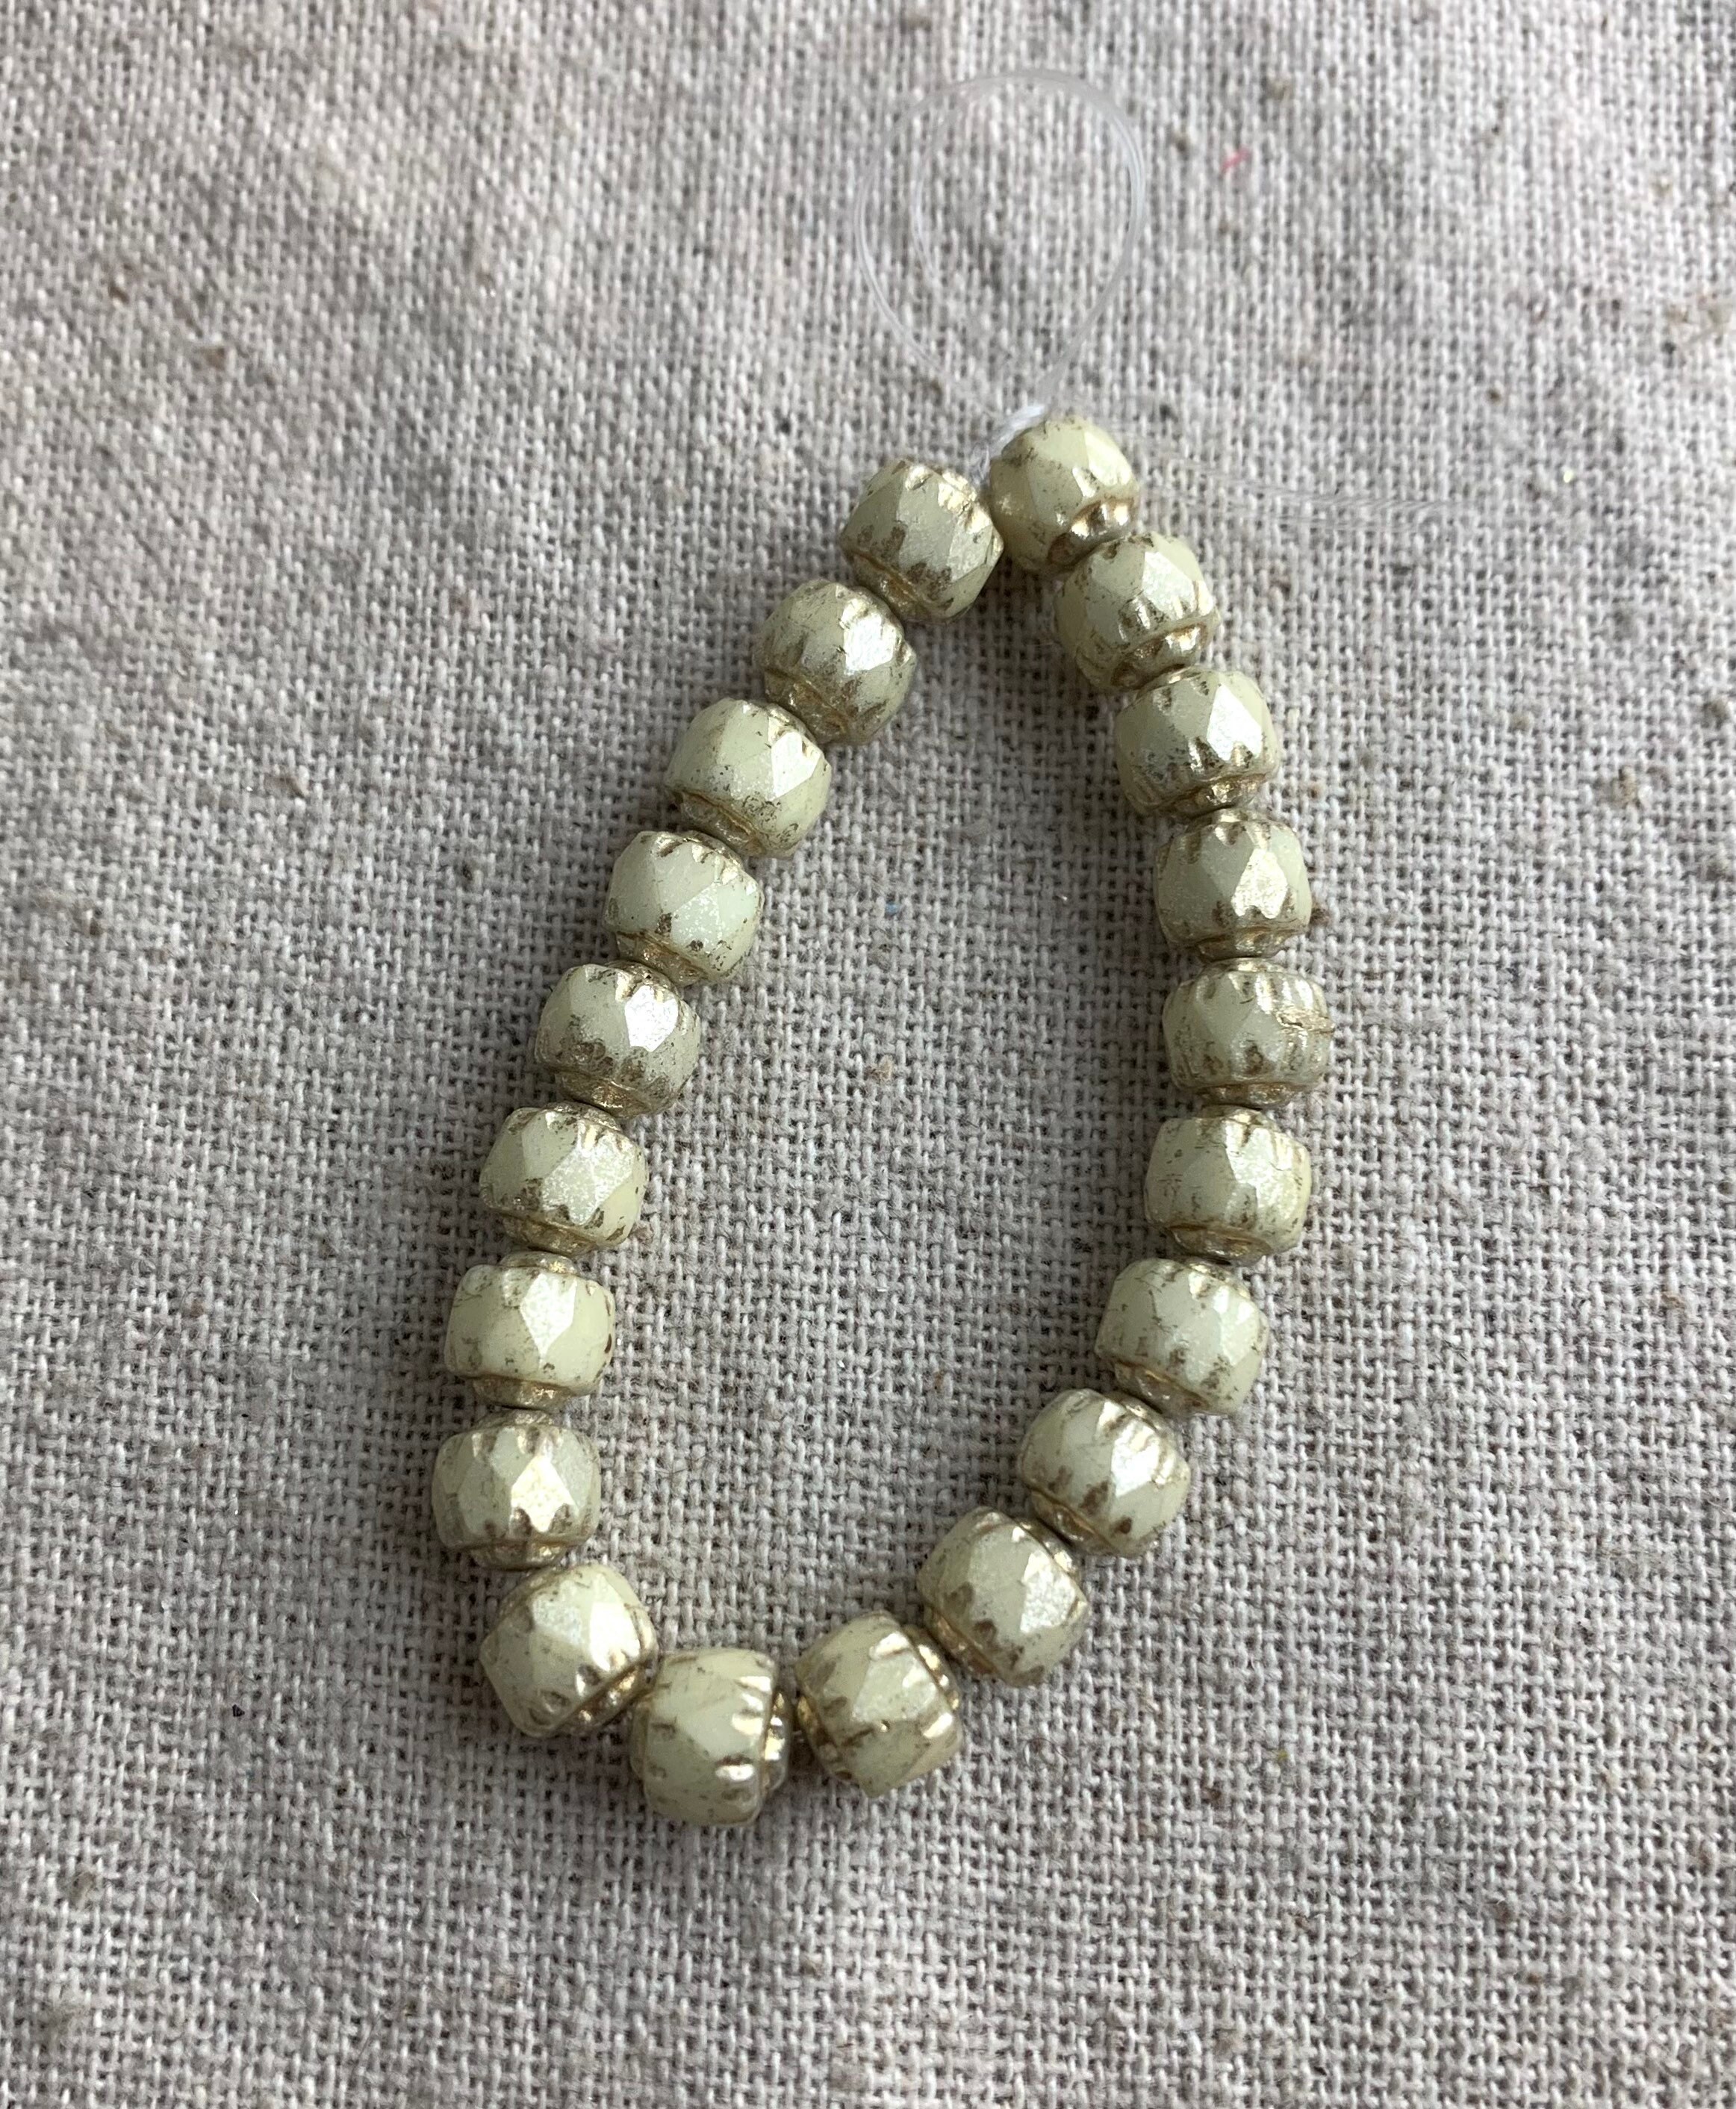 Restocked 10 Beads 6mm Cathedral Yellow Ivory Luster with a Silver Mercury Finish and a Gold Wash Fire Polished Faceted Czech Glass Beads